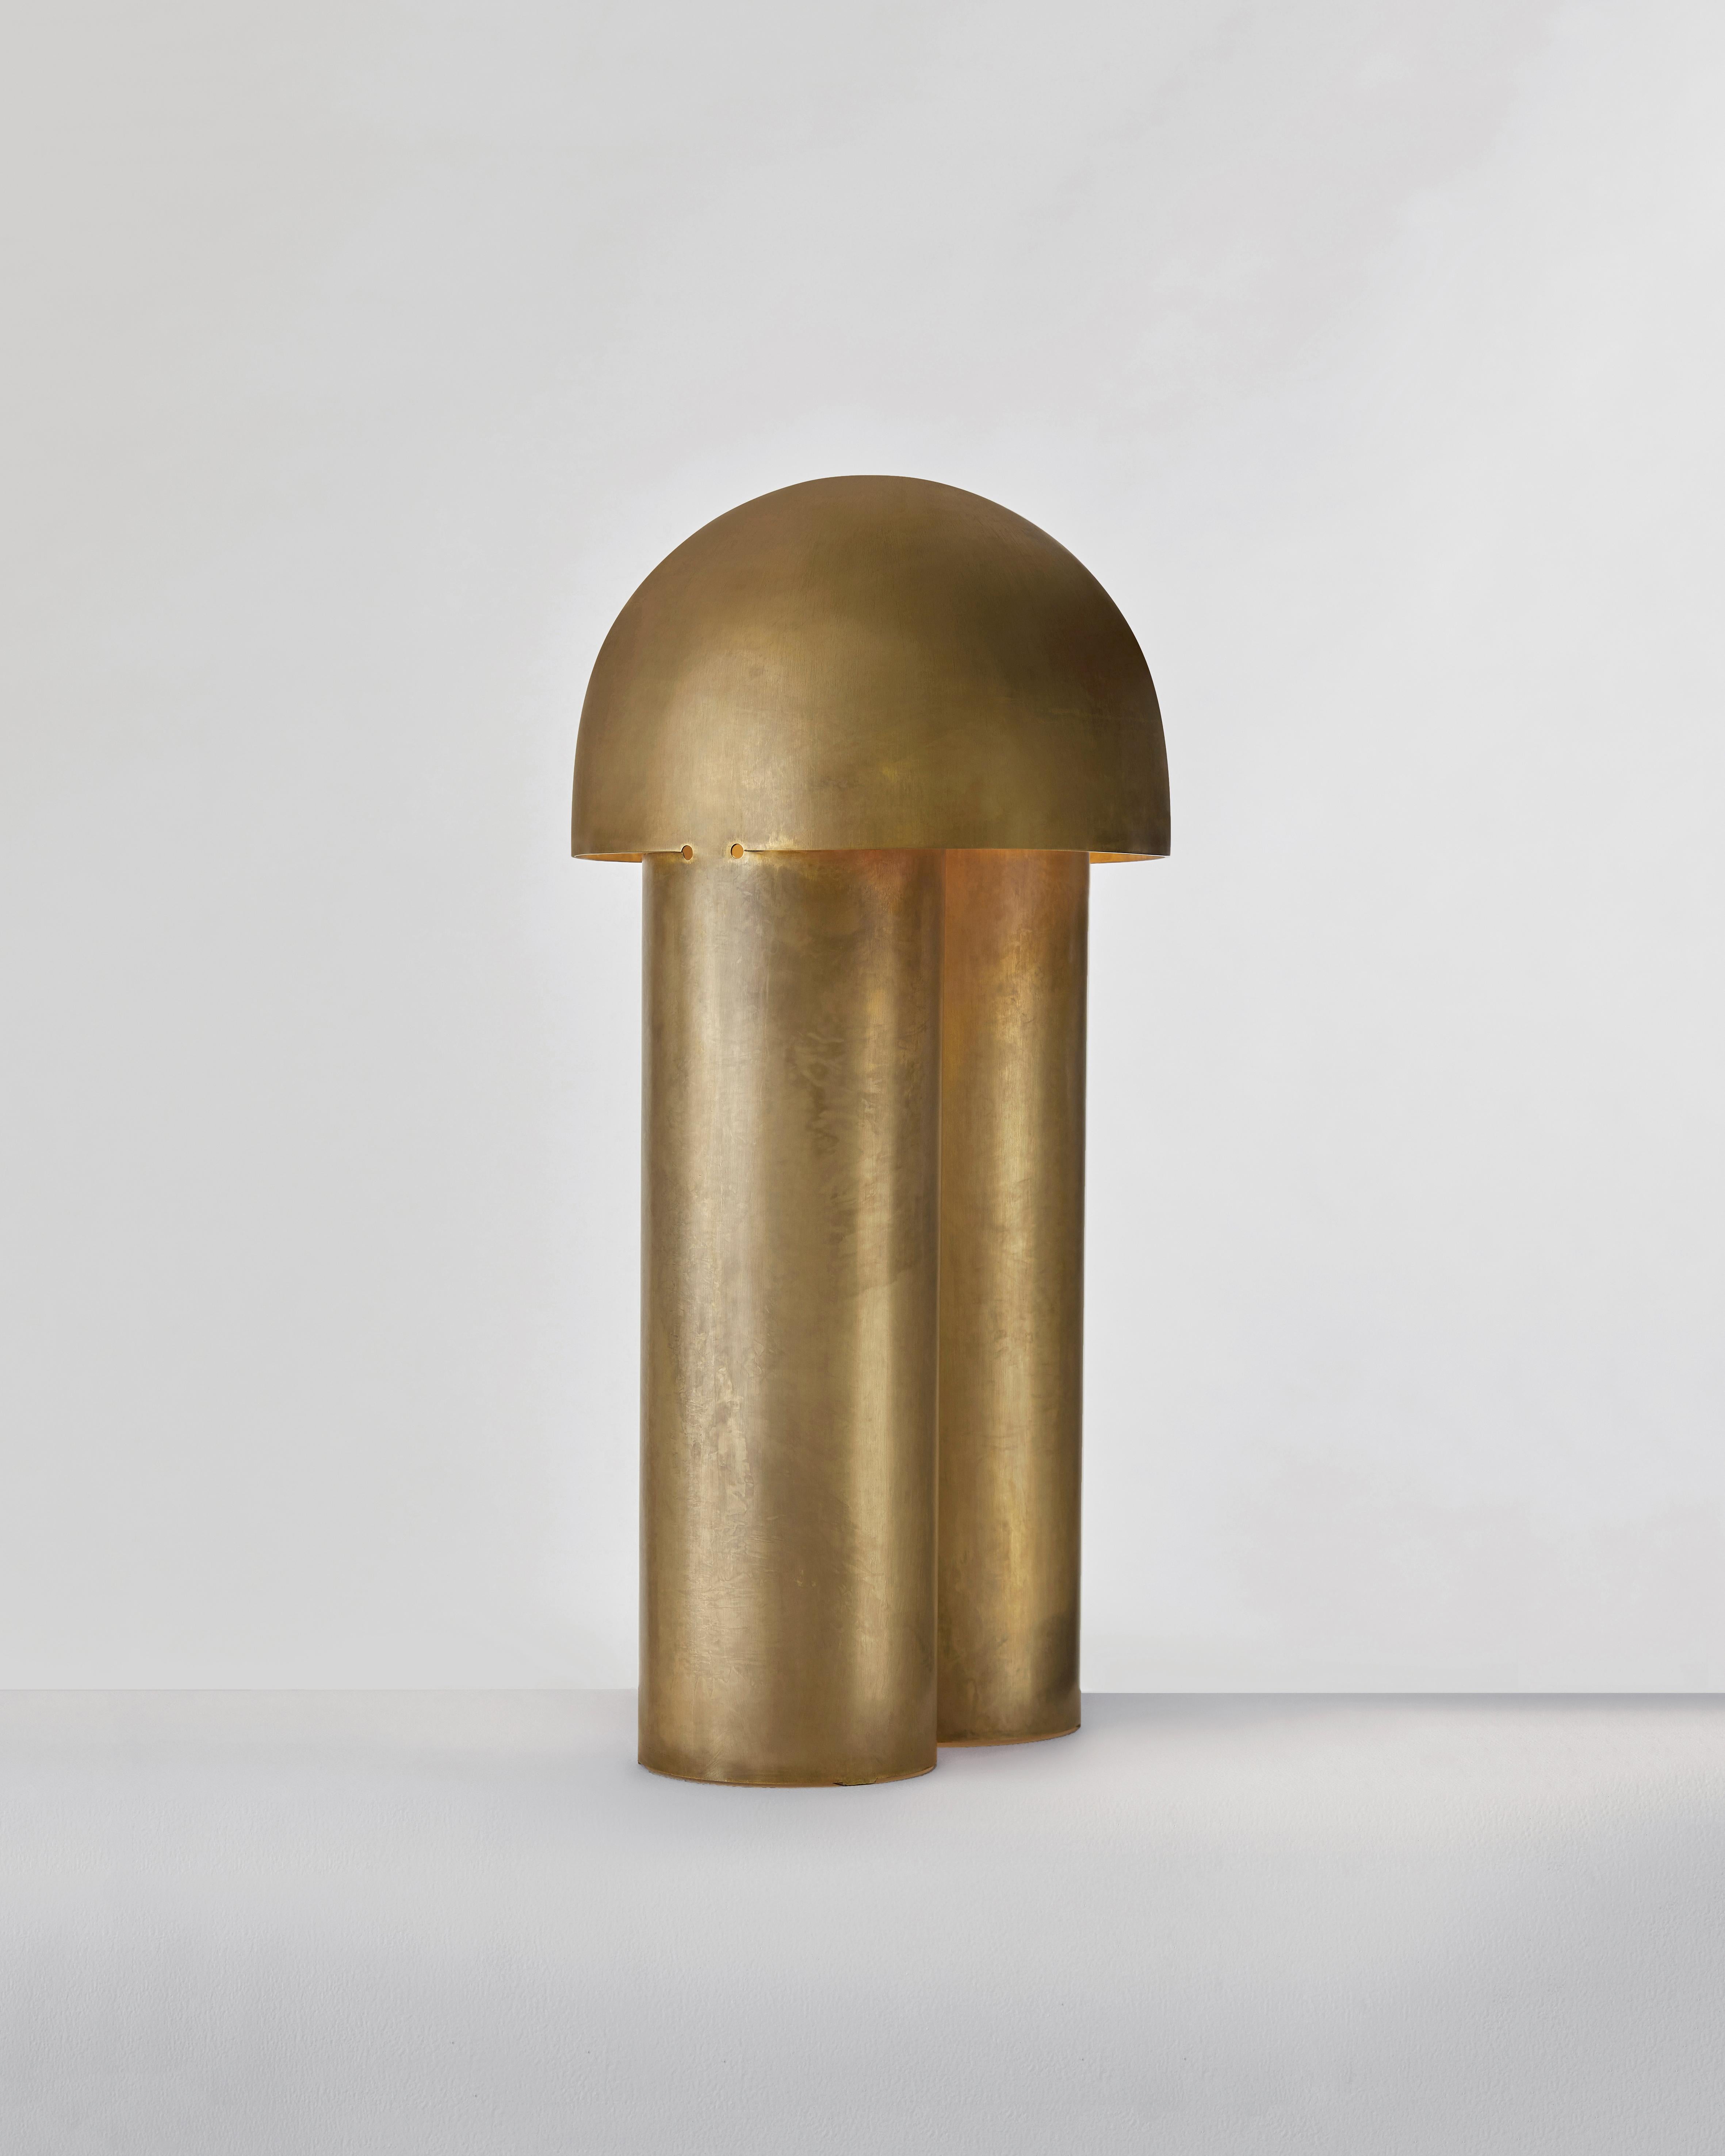 Large Monolith brass sculpted table lamp by Paul Matter
Measures: H 595 mm x D 280 mm
Weight: 3 kgs
Lamping: 1 type E14 base, 3 W-5 W LED, warm white
CE certified, voltage 220v-240v
Dimmable upon request
Materials: Brass

Custom